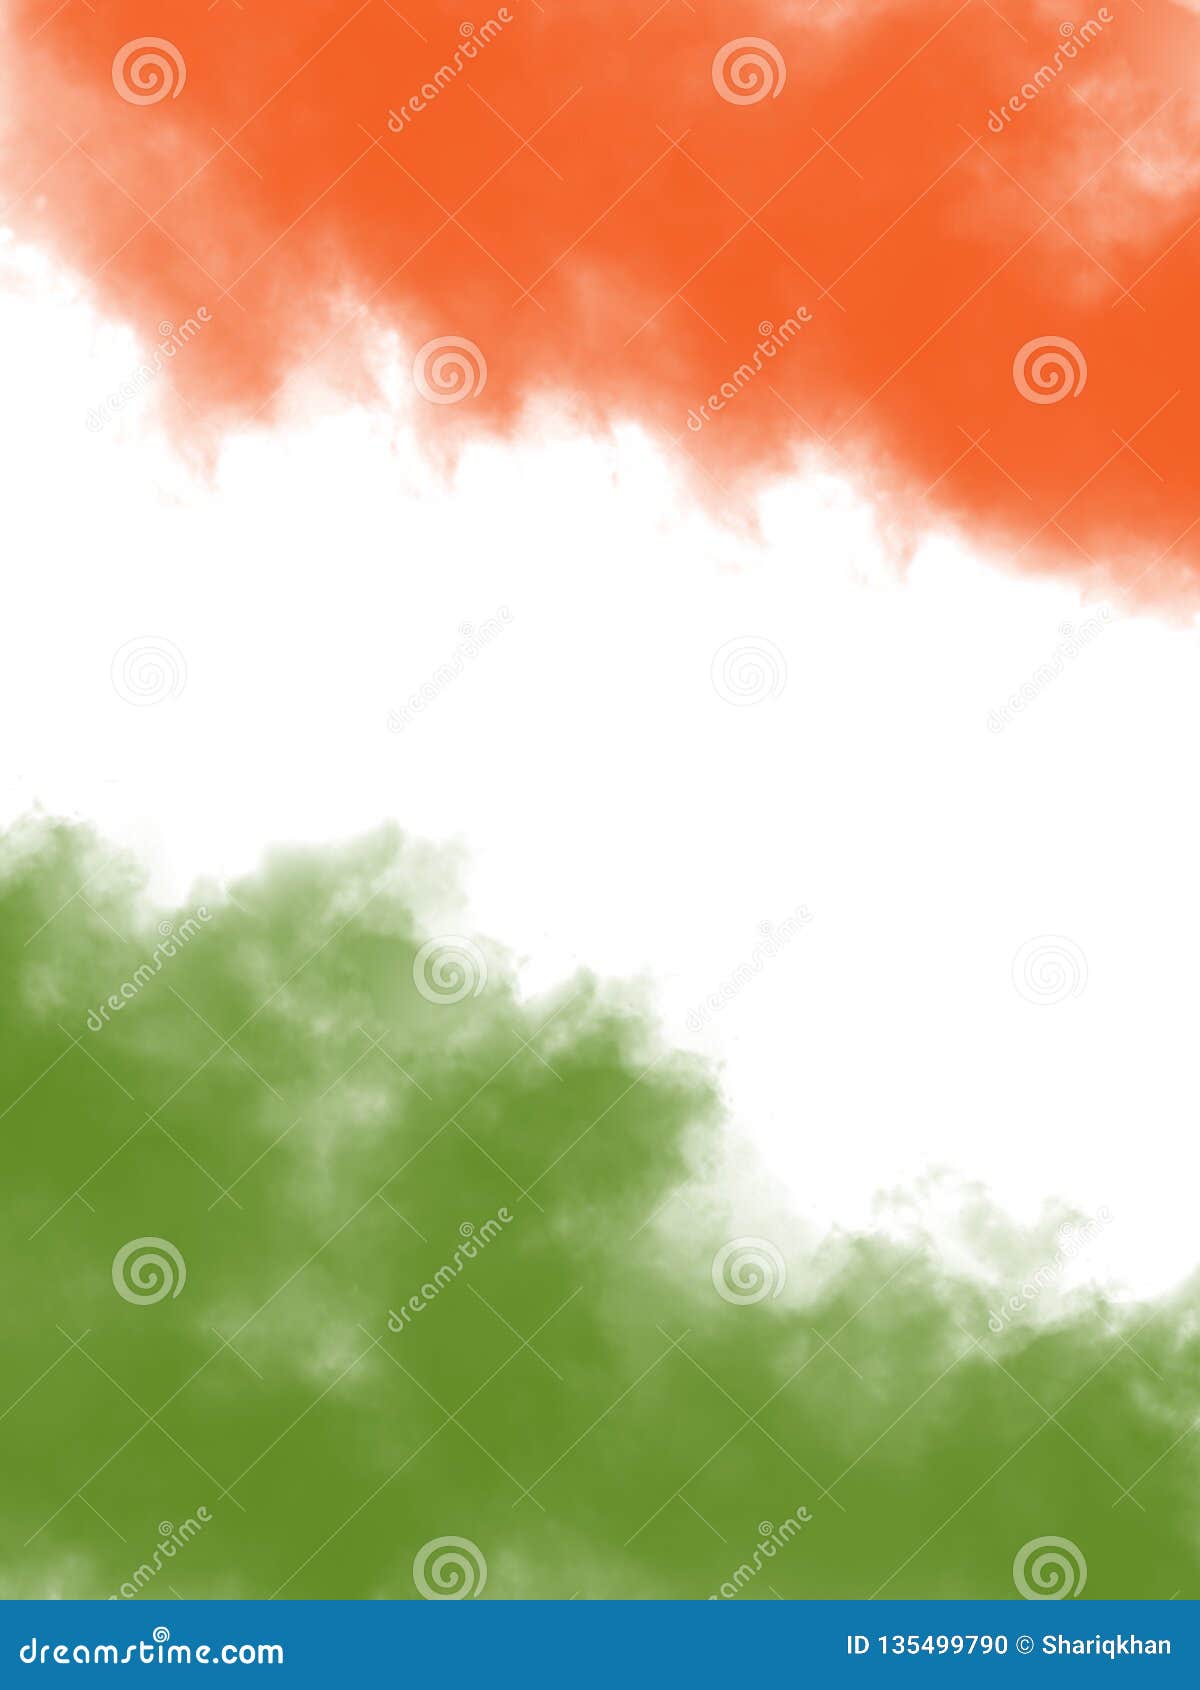 Indian Independence Day Greeting Background Tricolor Stock Photo - Image of  abstract, nationalism: 135499790